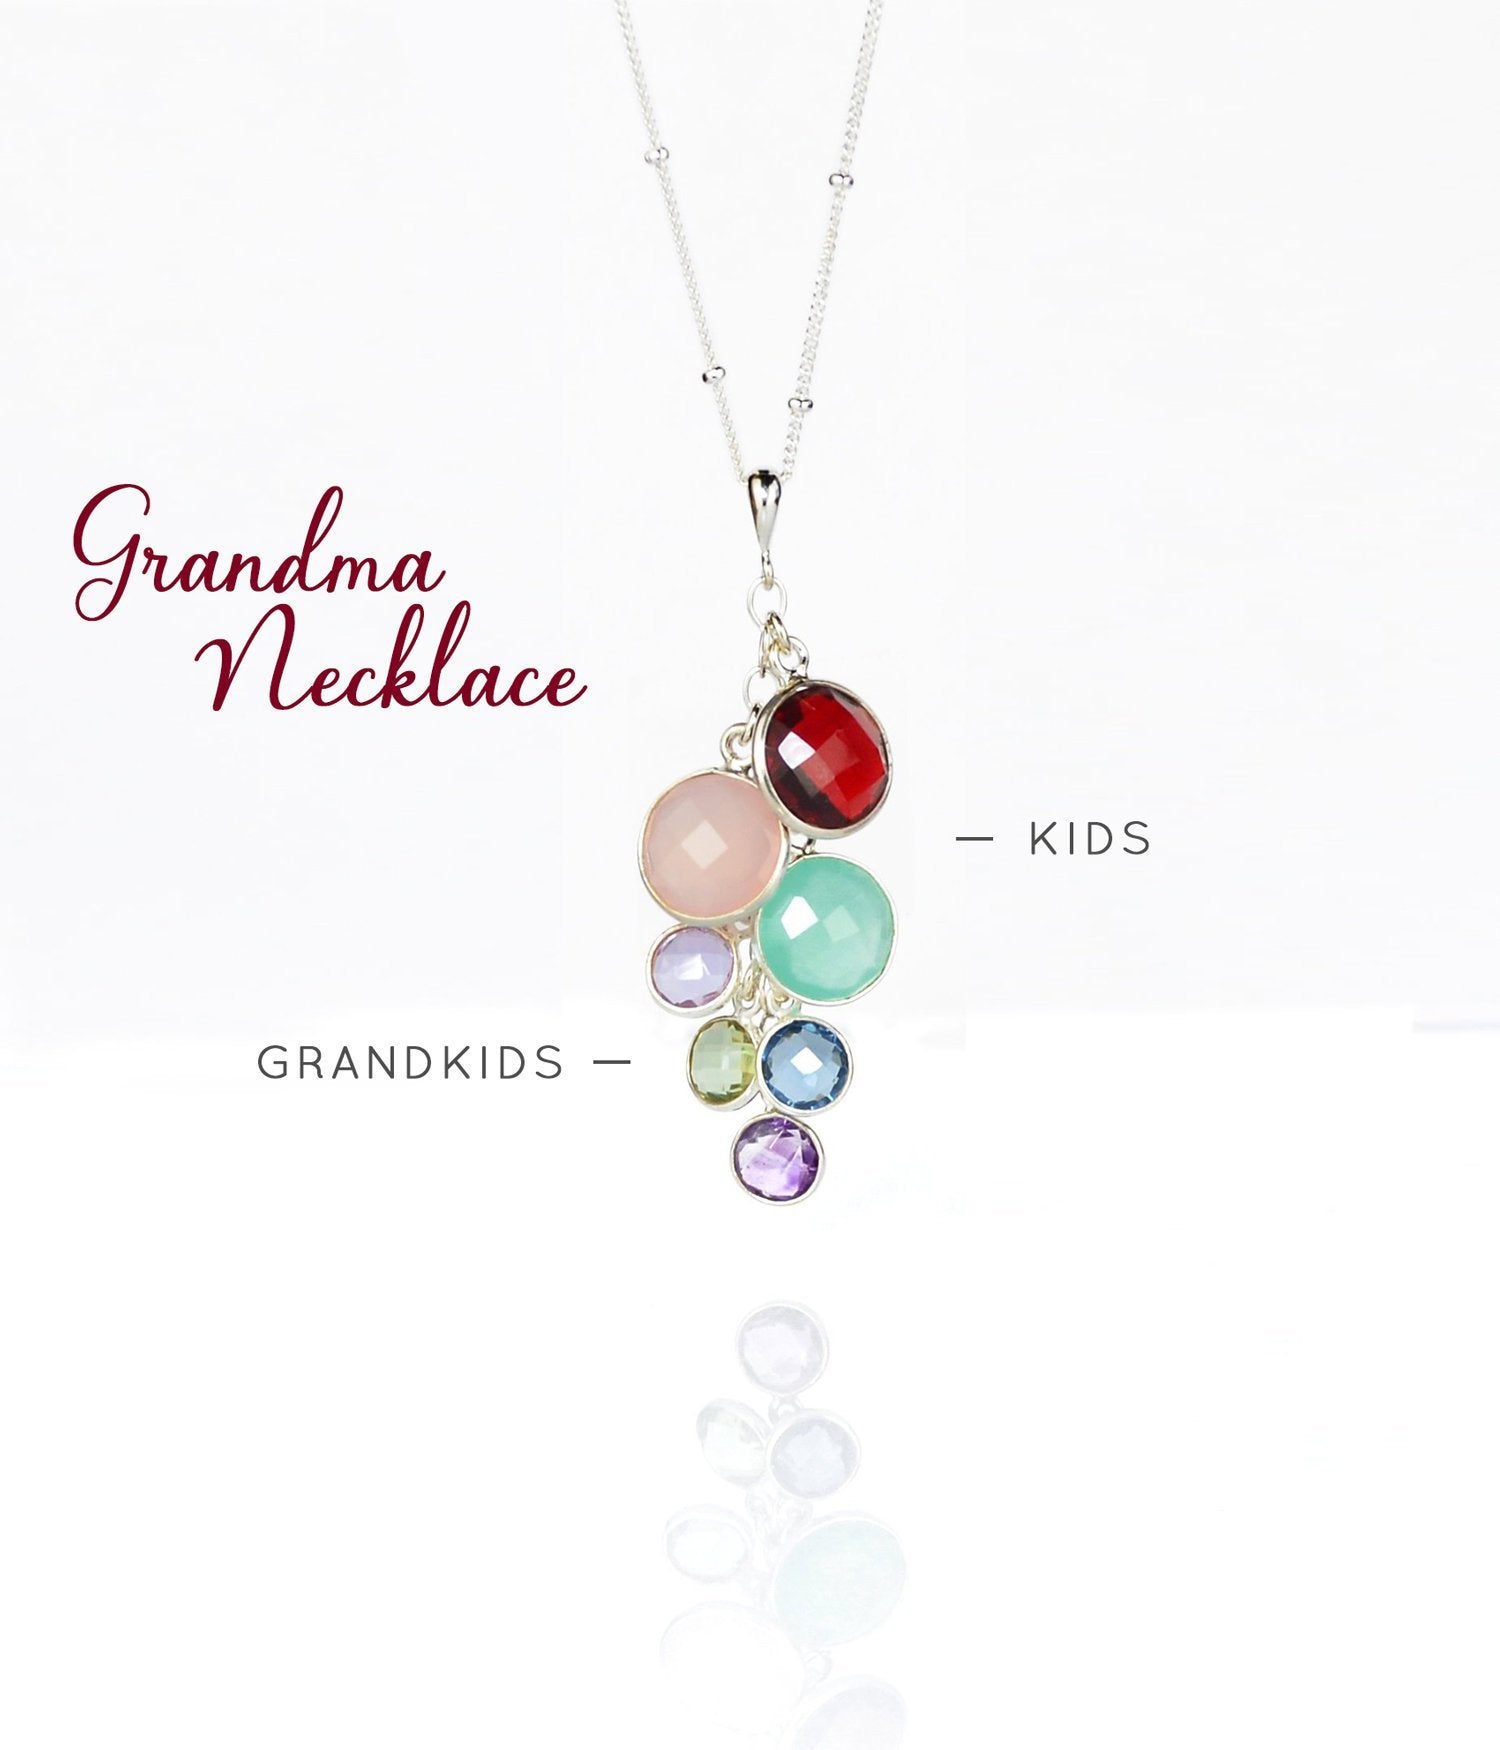 Amazon.com: Personalized Grandma Necklace - Custom Birthstone Charm Colors  - Engraved Disc - Grandmothers Christmas Gift - Mother's Day Gift - in  Sterling Silver : Handmade Products